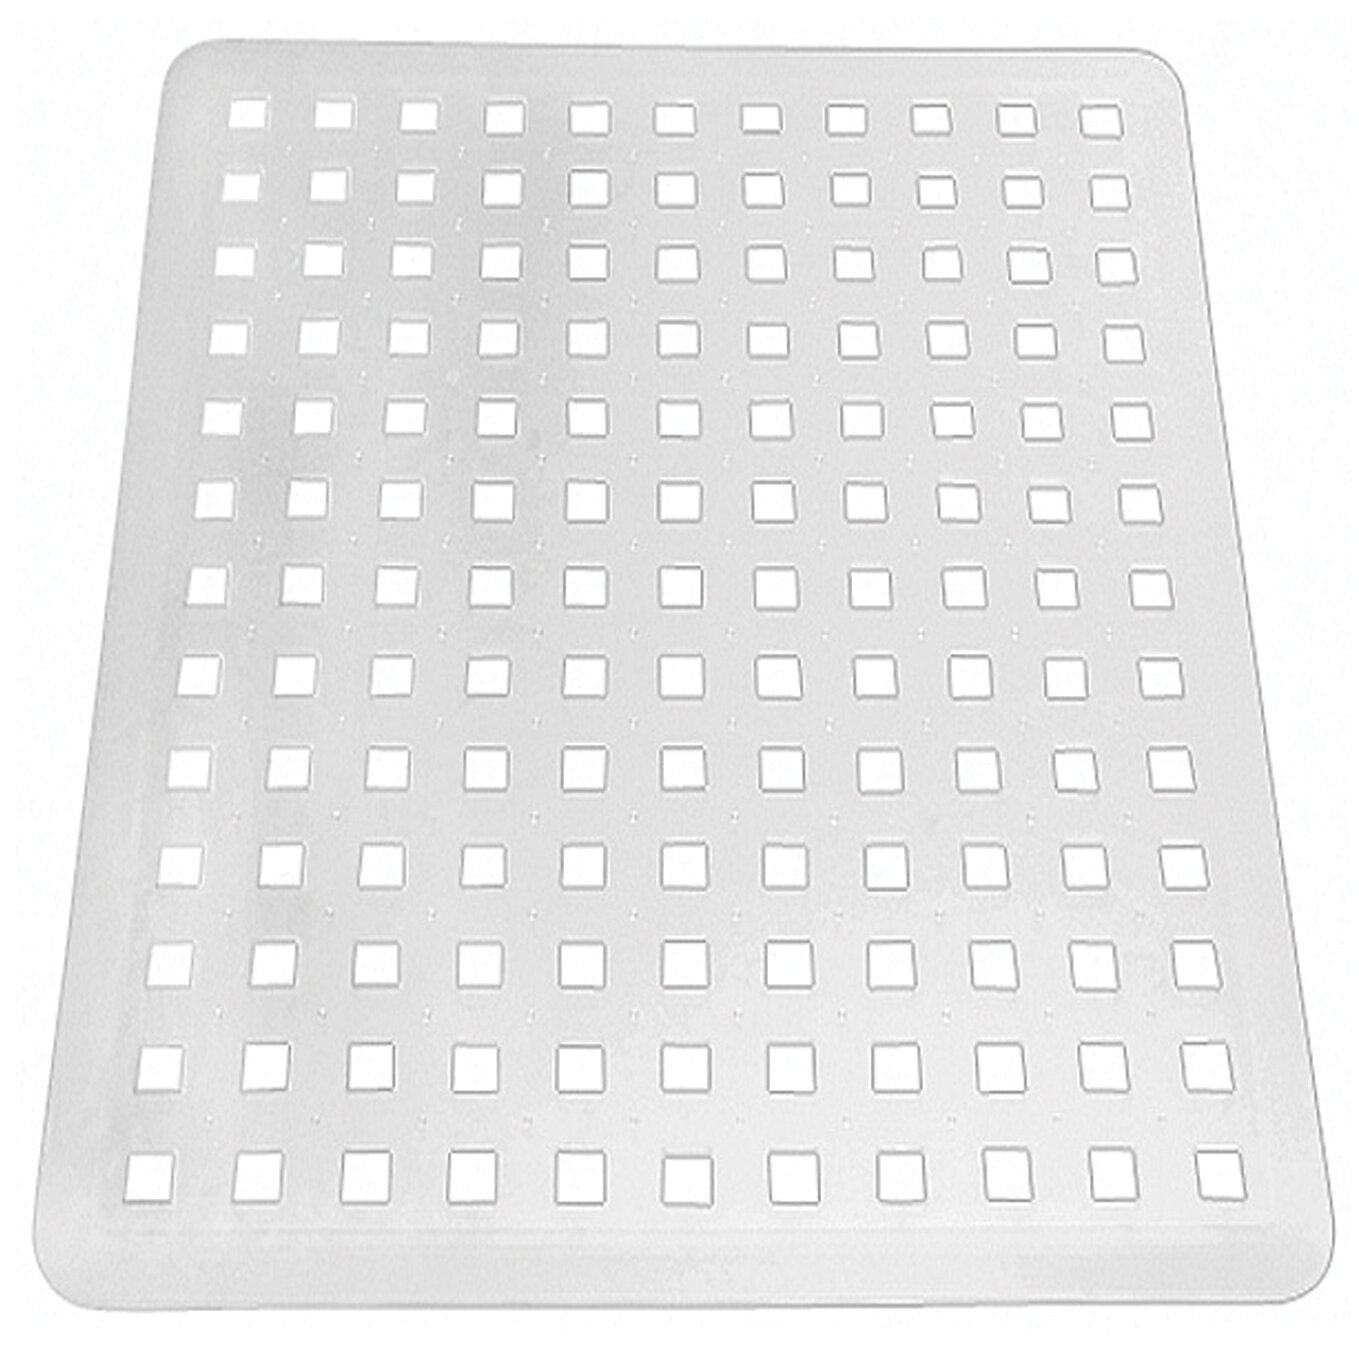 Large Silicone Draining Board Mat for Kitchen Sink, iDesign Dish Drainer Mat 